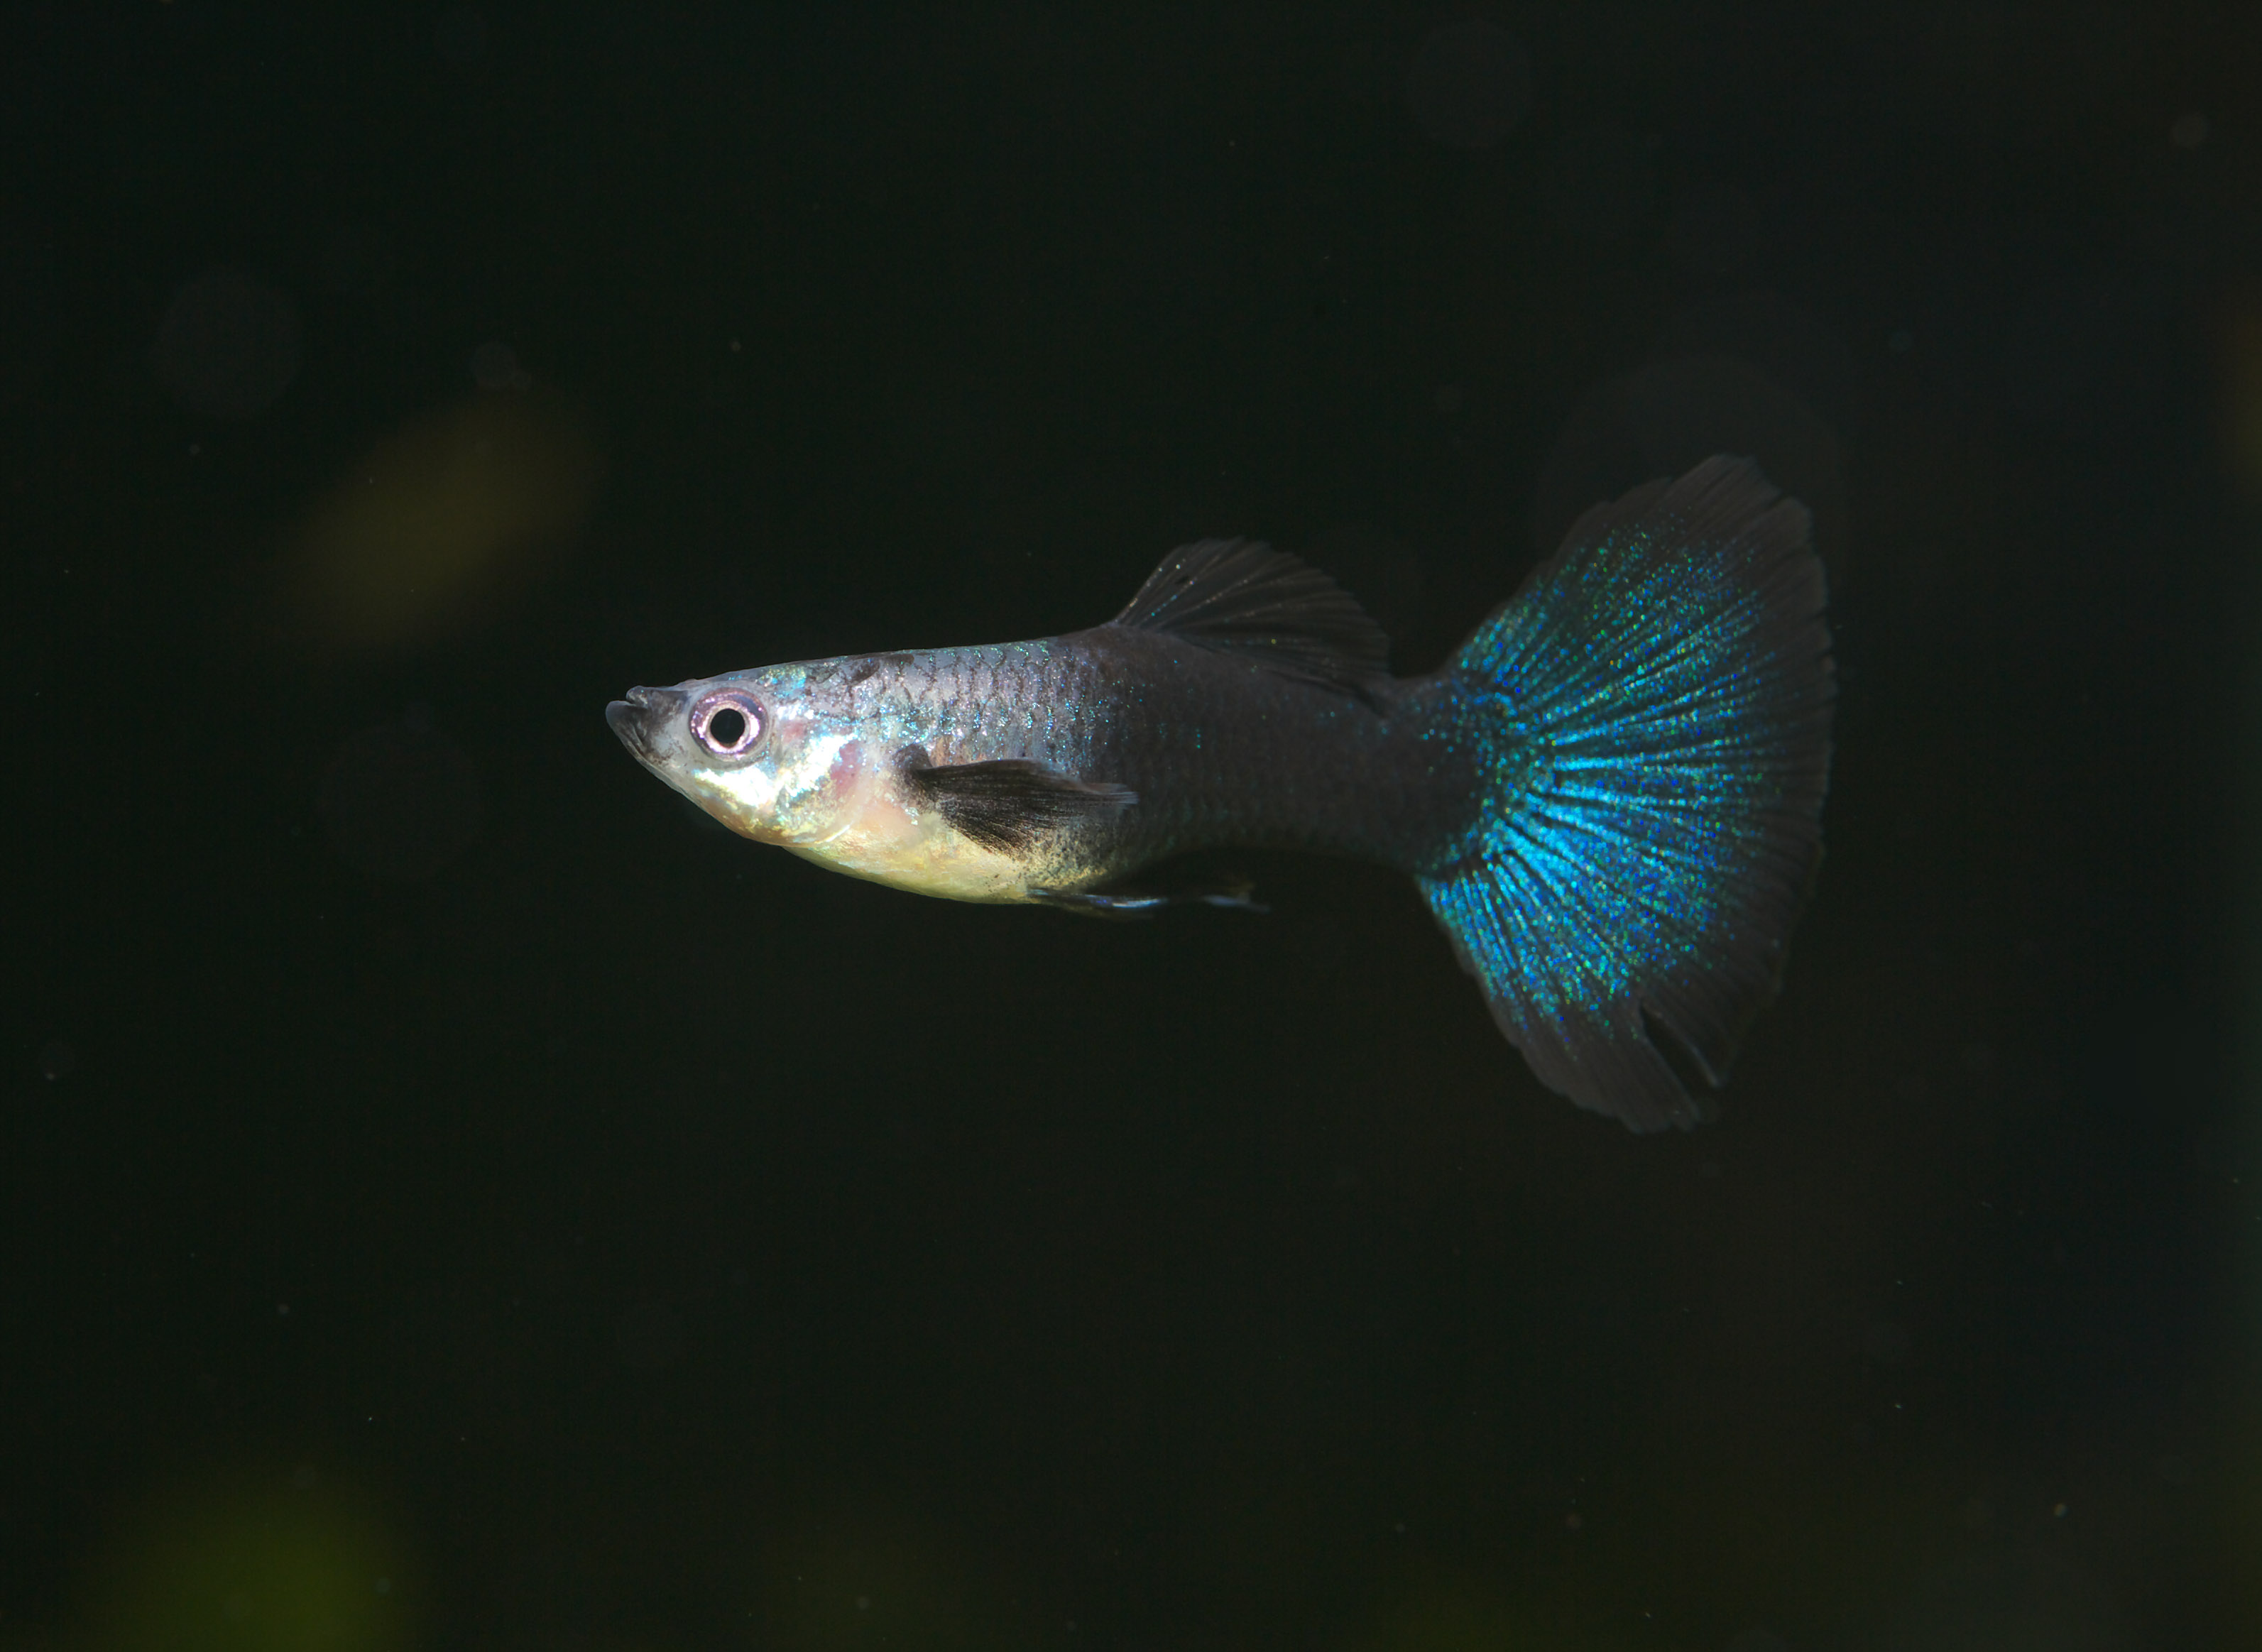 photo,material,free,landscape,picture,stock photo,Creative Commons,A guppy, Tropical fish, An admiration fish, Black, Blue